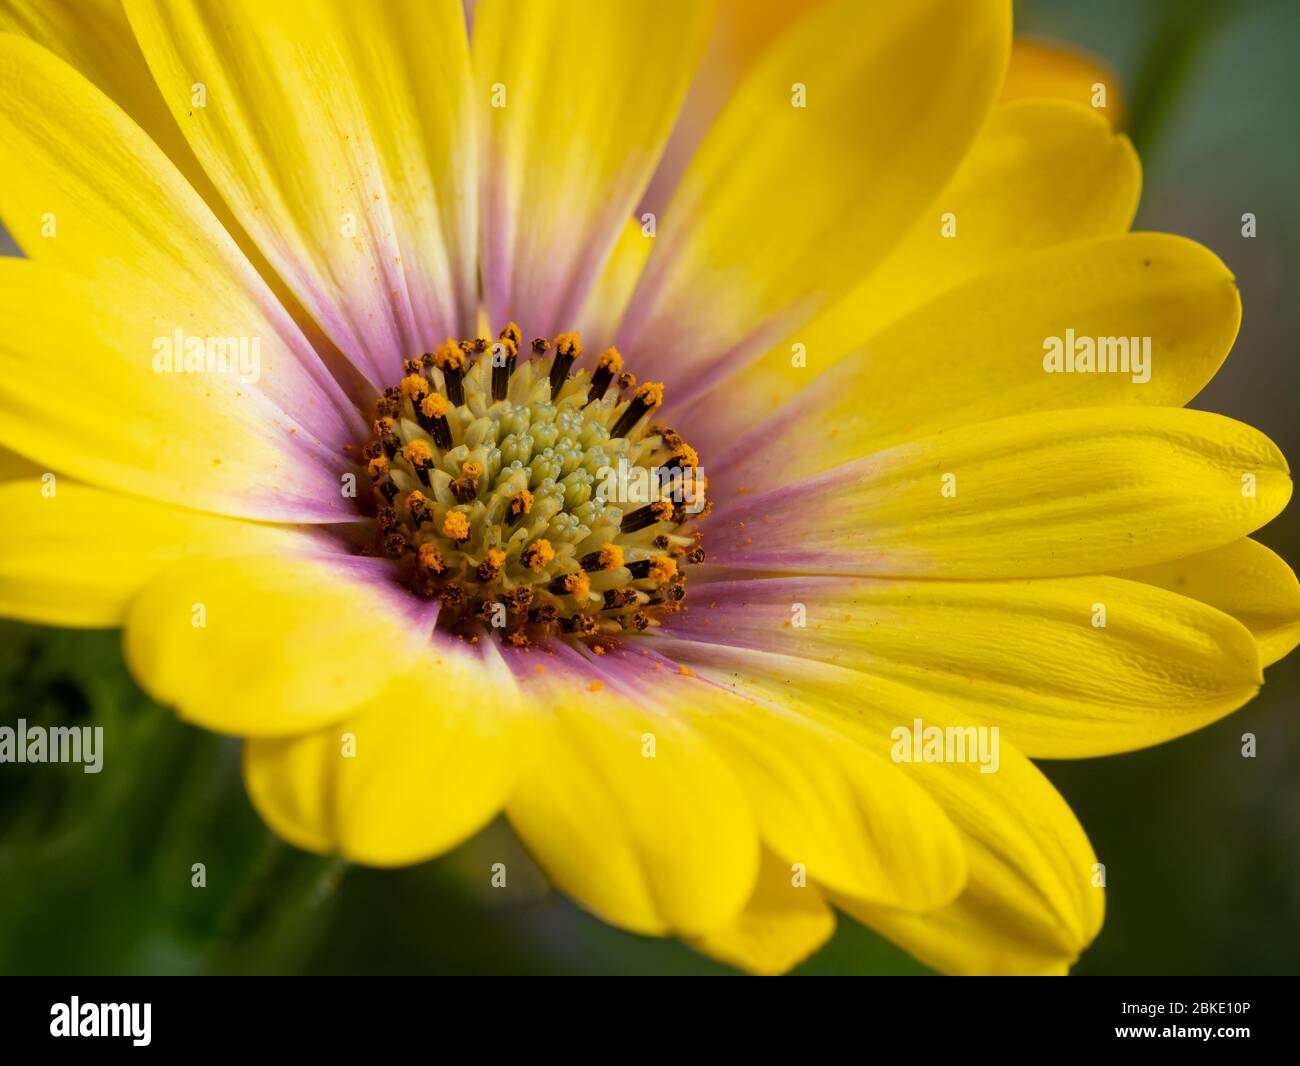 Brilliant Yellow Bicolor Close Up Of A Daisy Type Flower Oseoperumum Ecklonis Showing Flower Anatomy Stock Photo Alamy